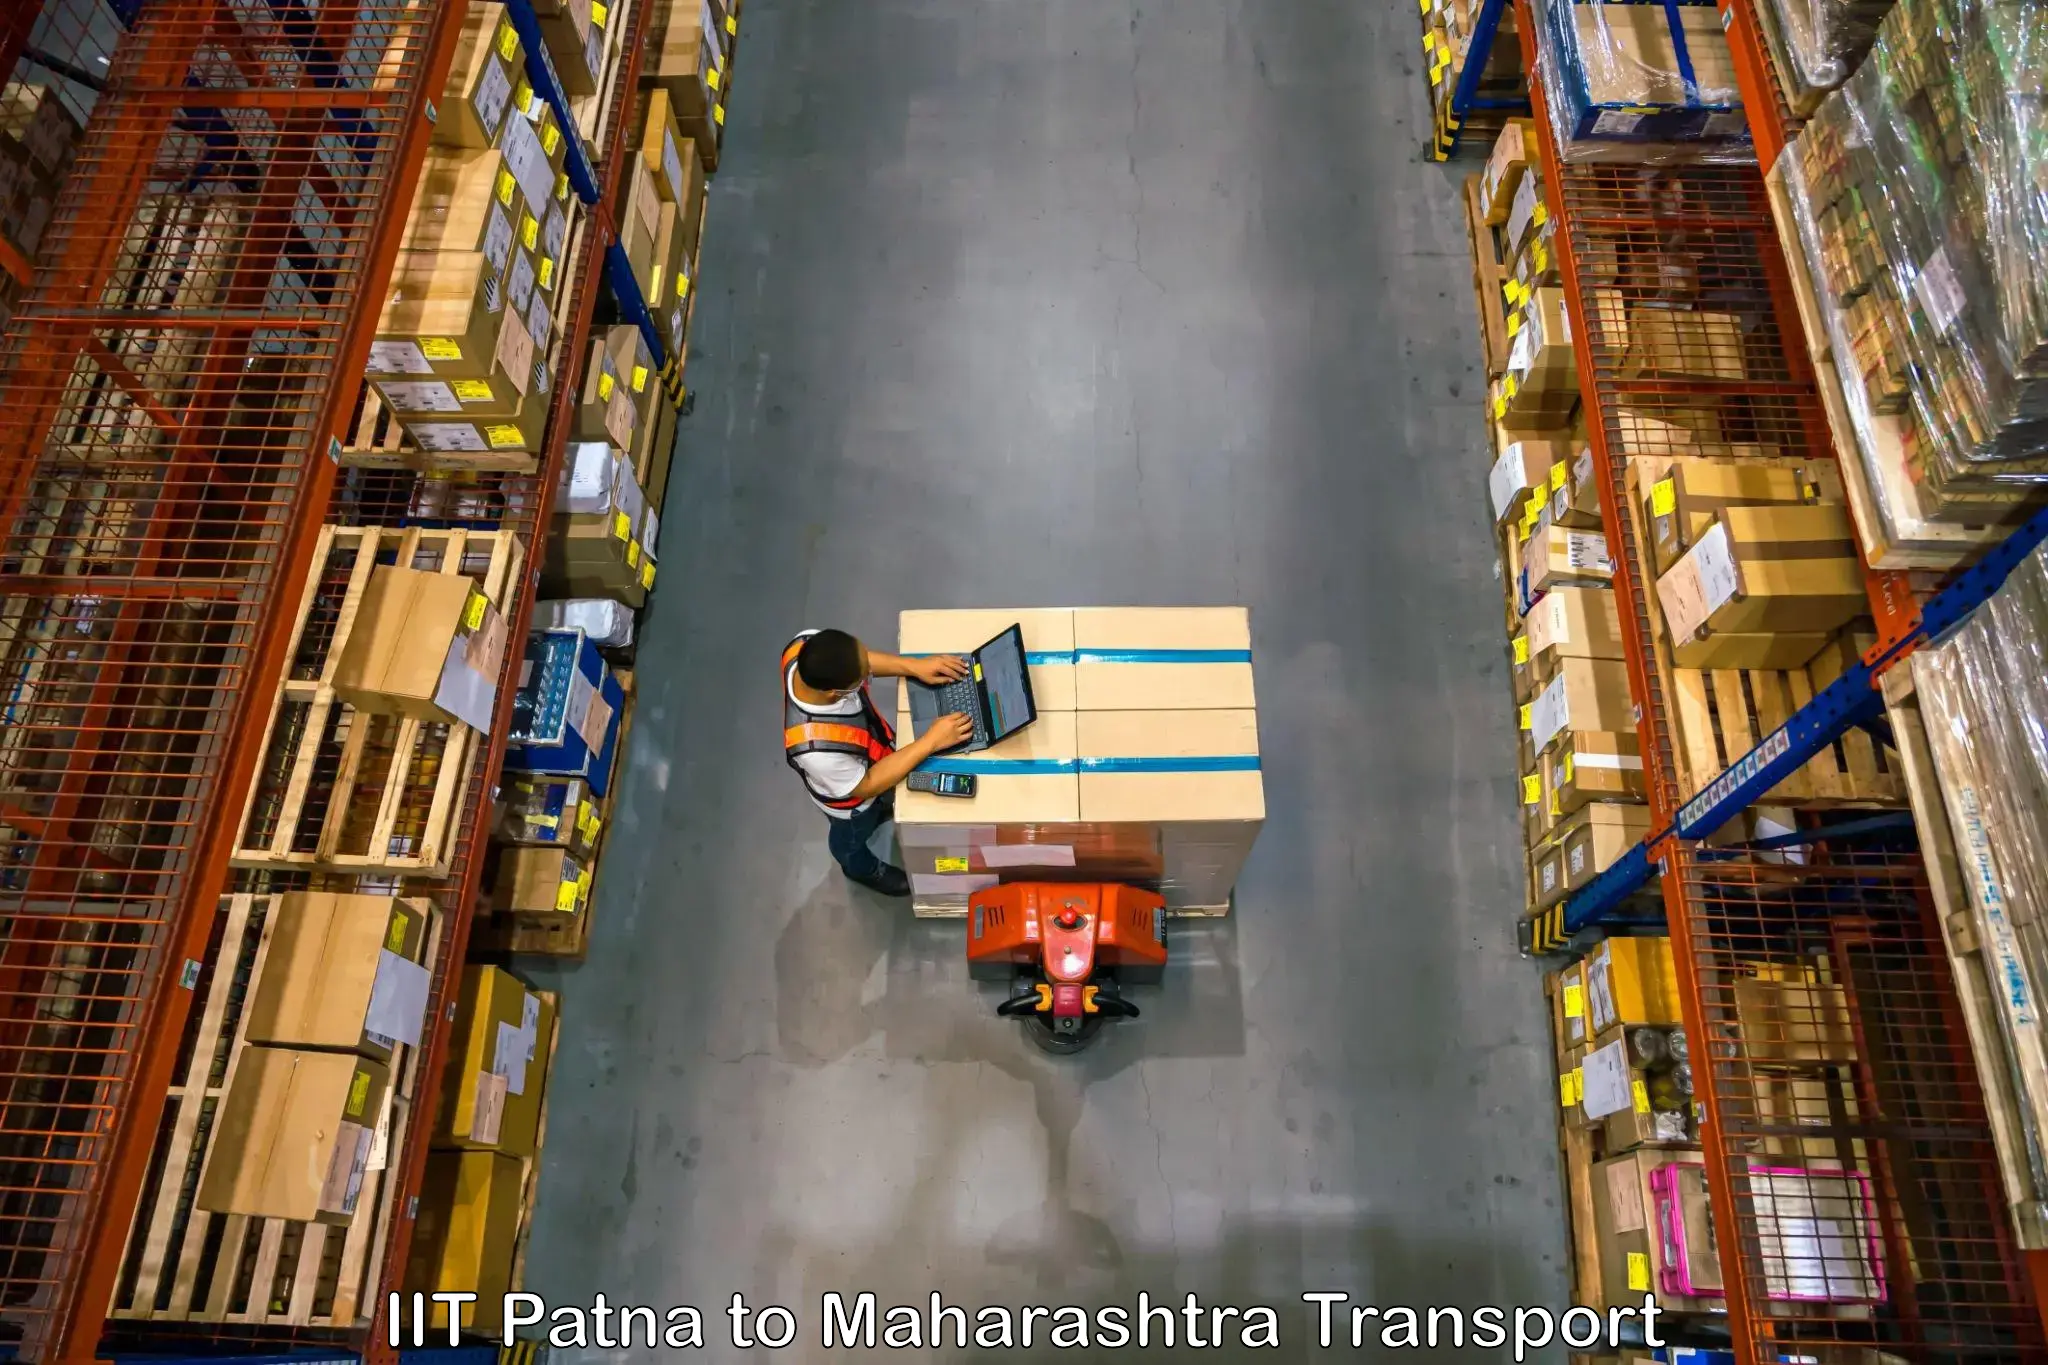 Daily parcel service transport IIT Patna to Mantha